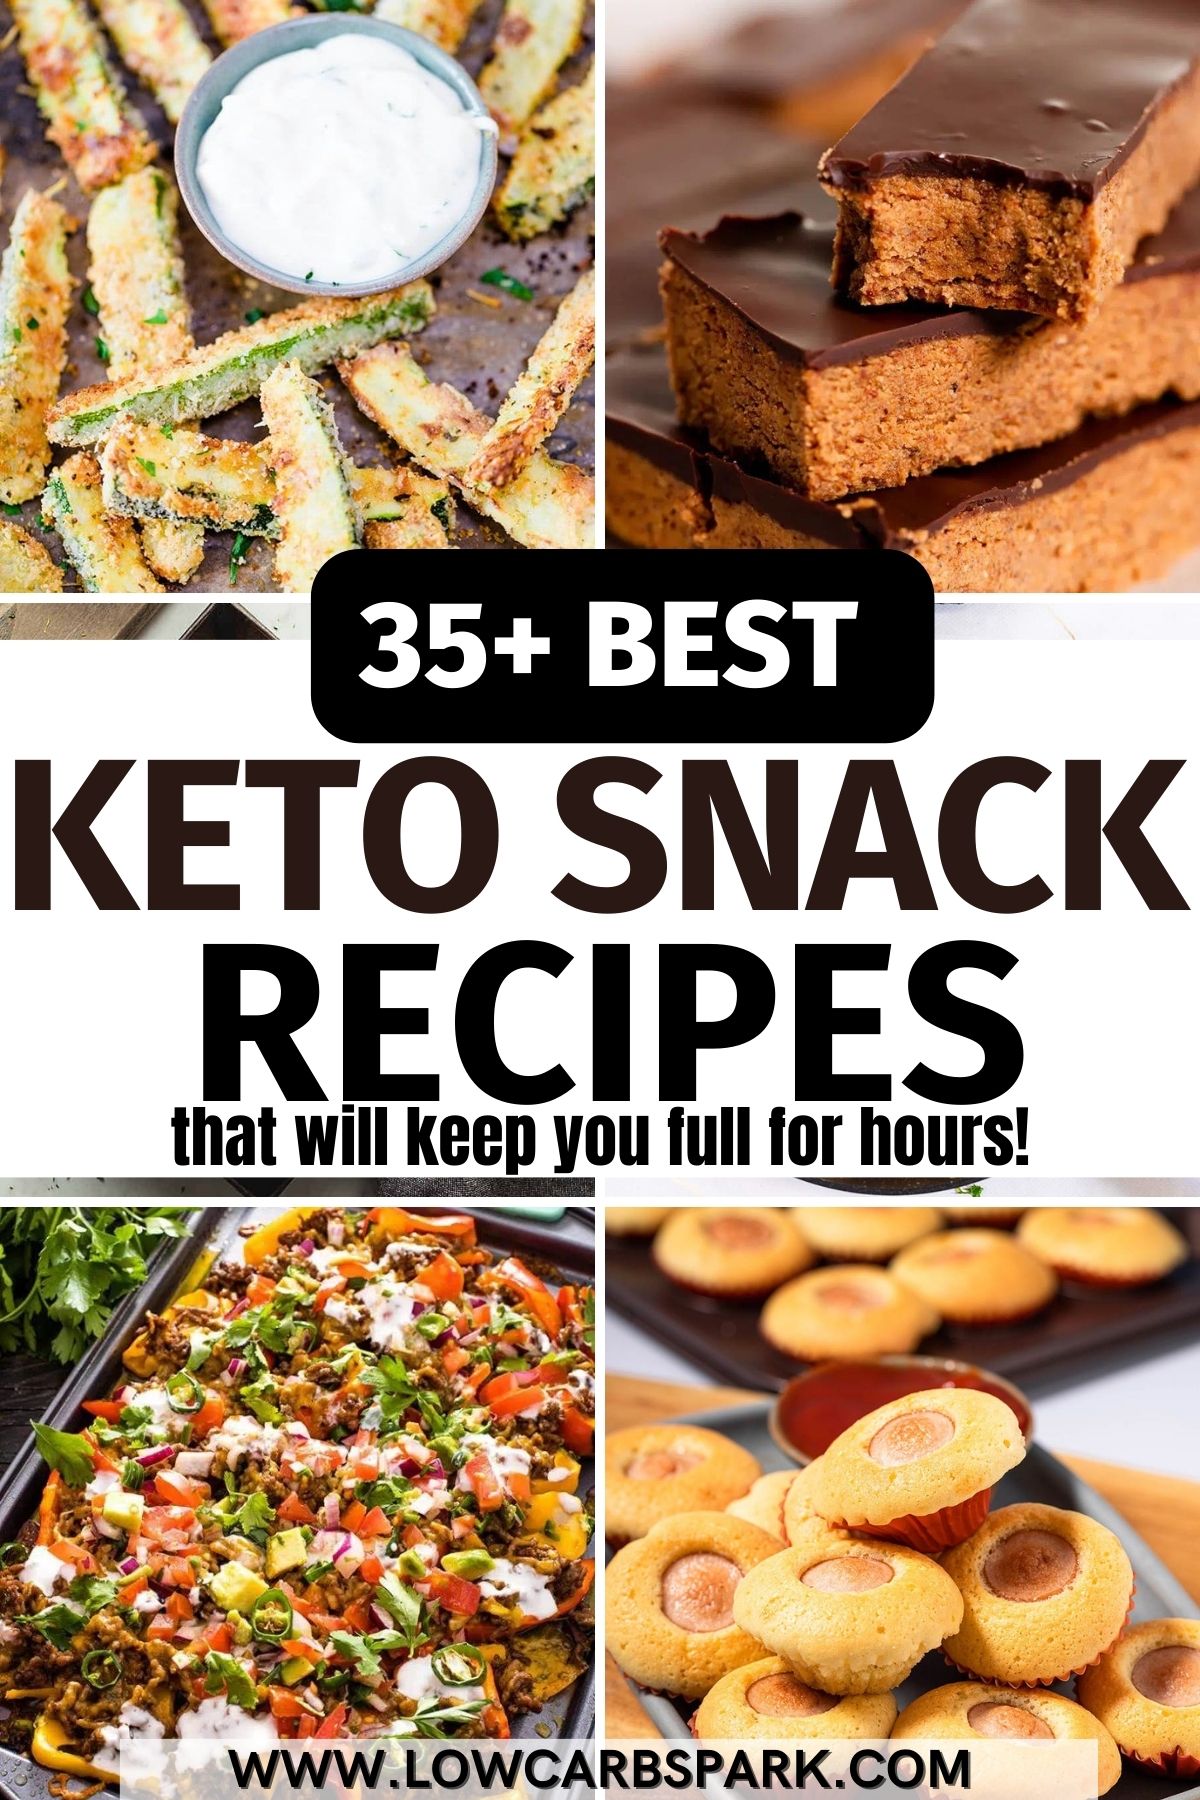 35 best keto snack recipes that will keep you full